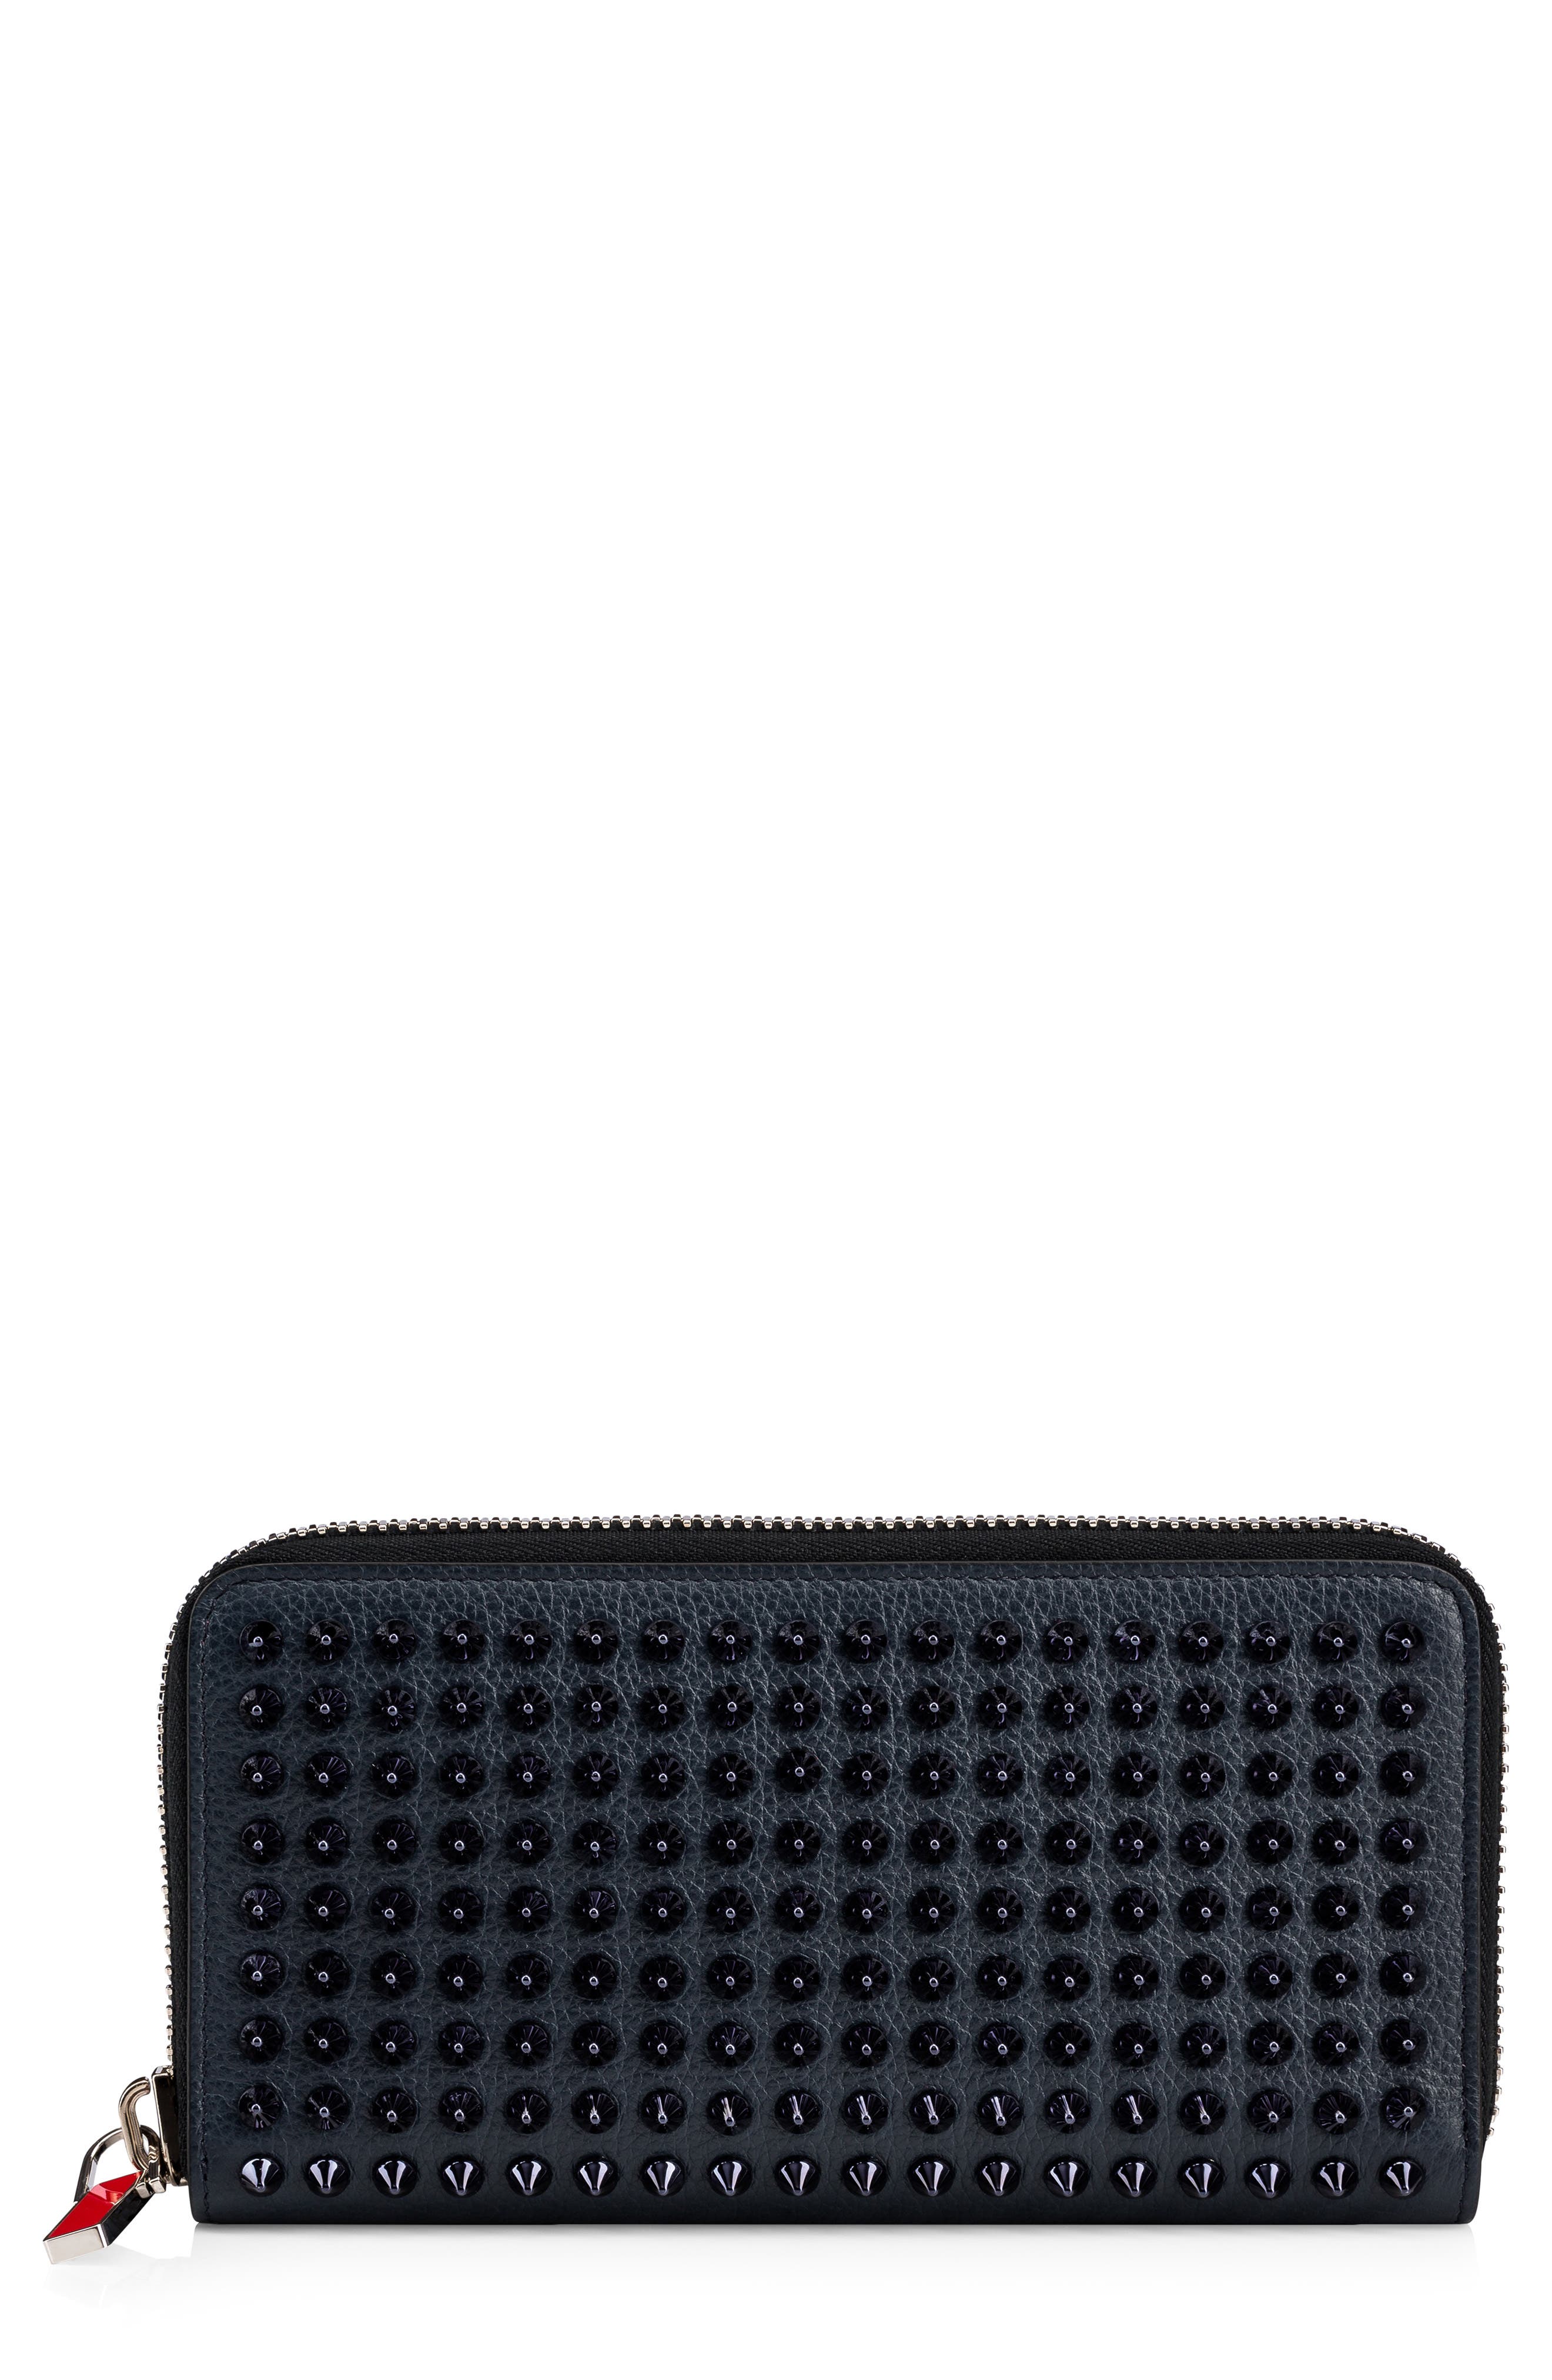 Christian Louboutin Panettone Spikes Calfskin Zip Wallet in Navy/Navy at Nordstrom